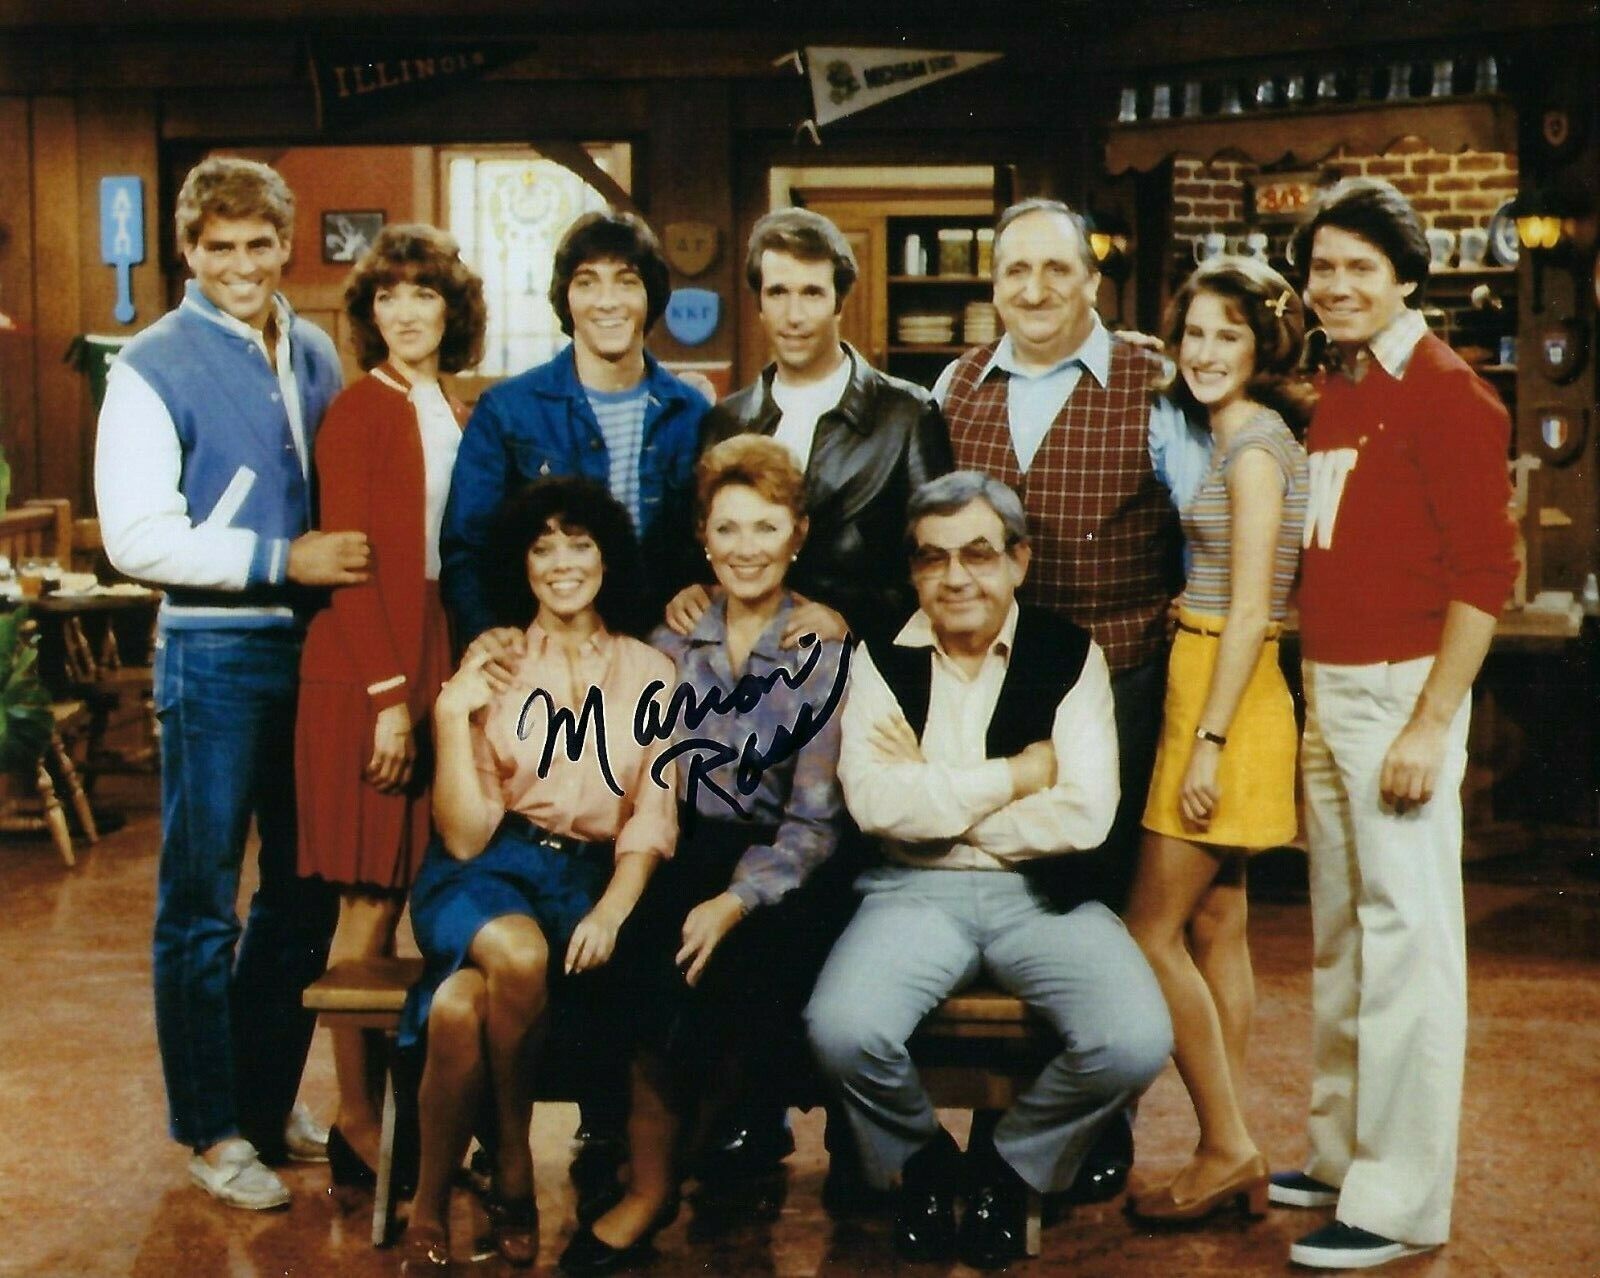 GFA Happy Days Marion Show * MARION ROSS * Signed 8x10 Photo Poster painting M2 COA